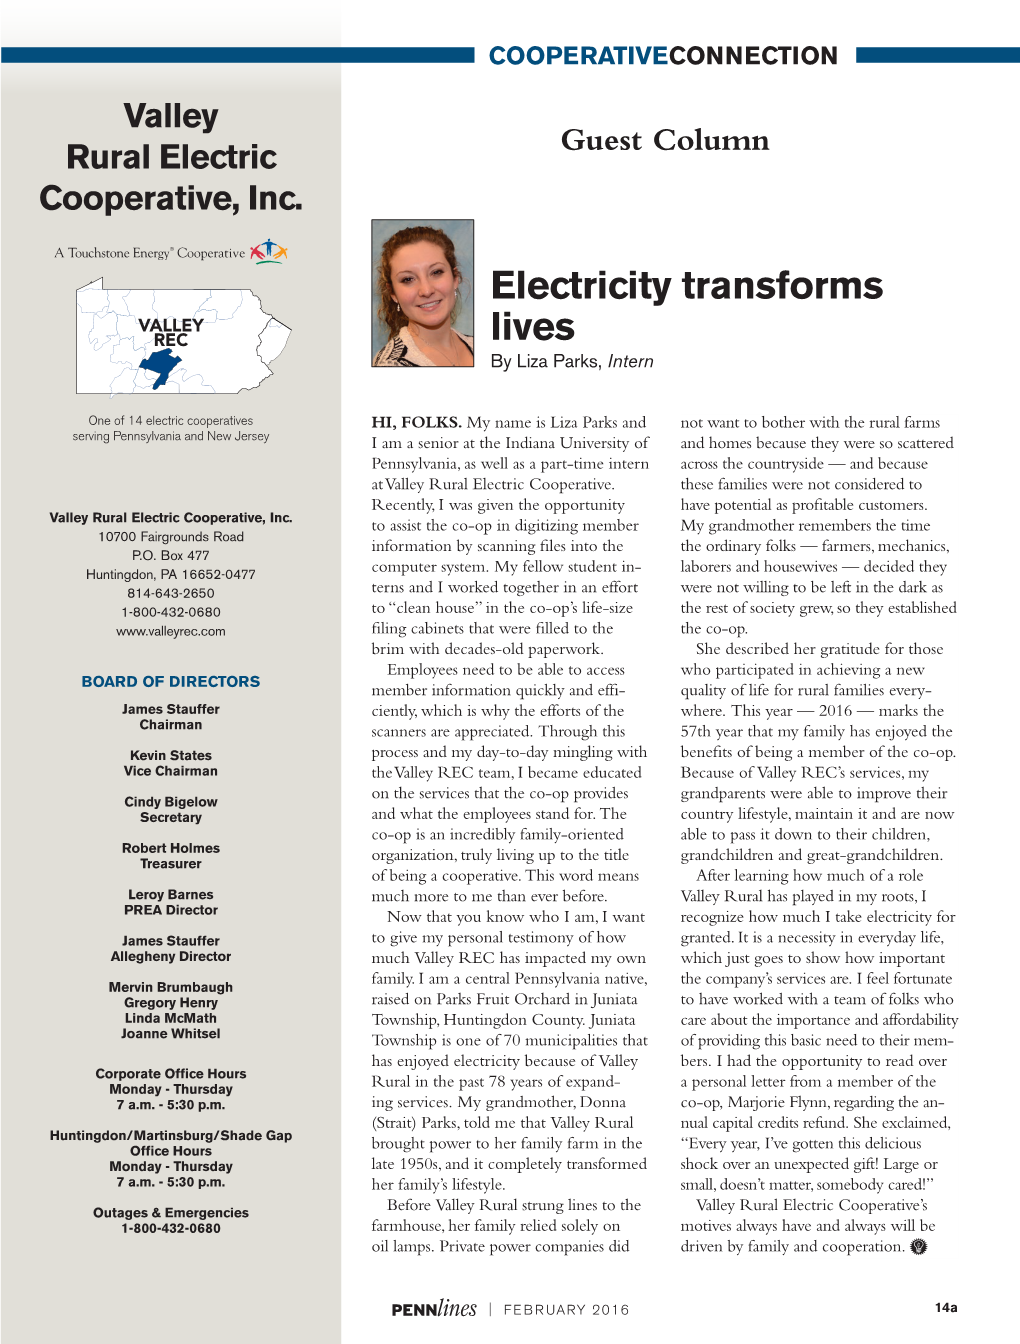 FEBRUARY 2016 14A Valley Rural Electric Cooperative, Inc